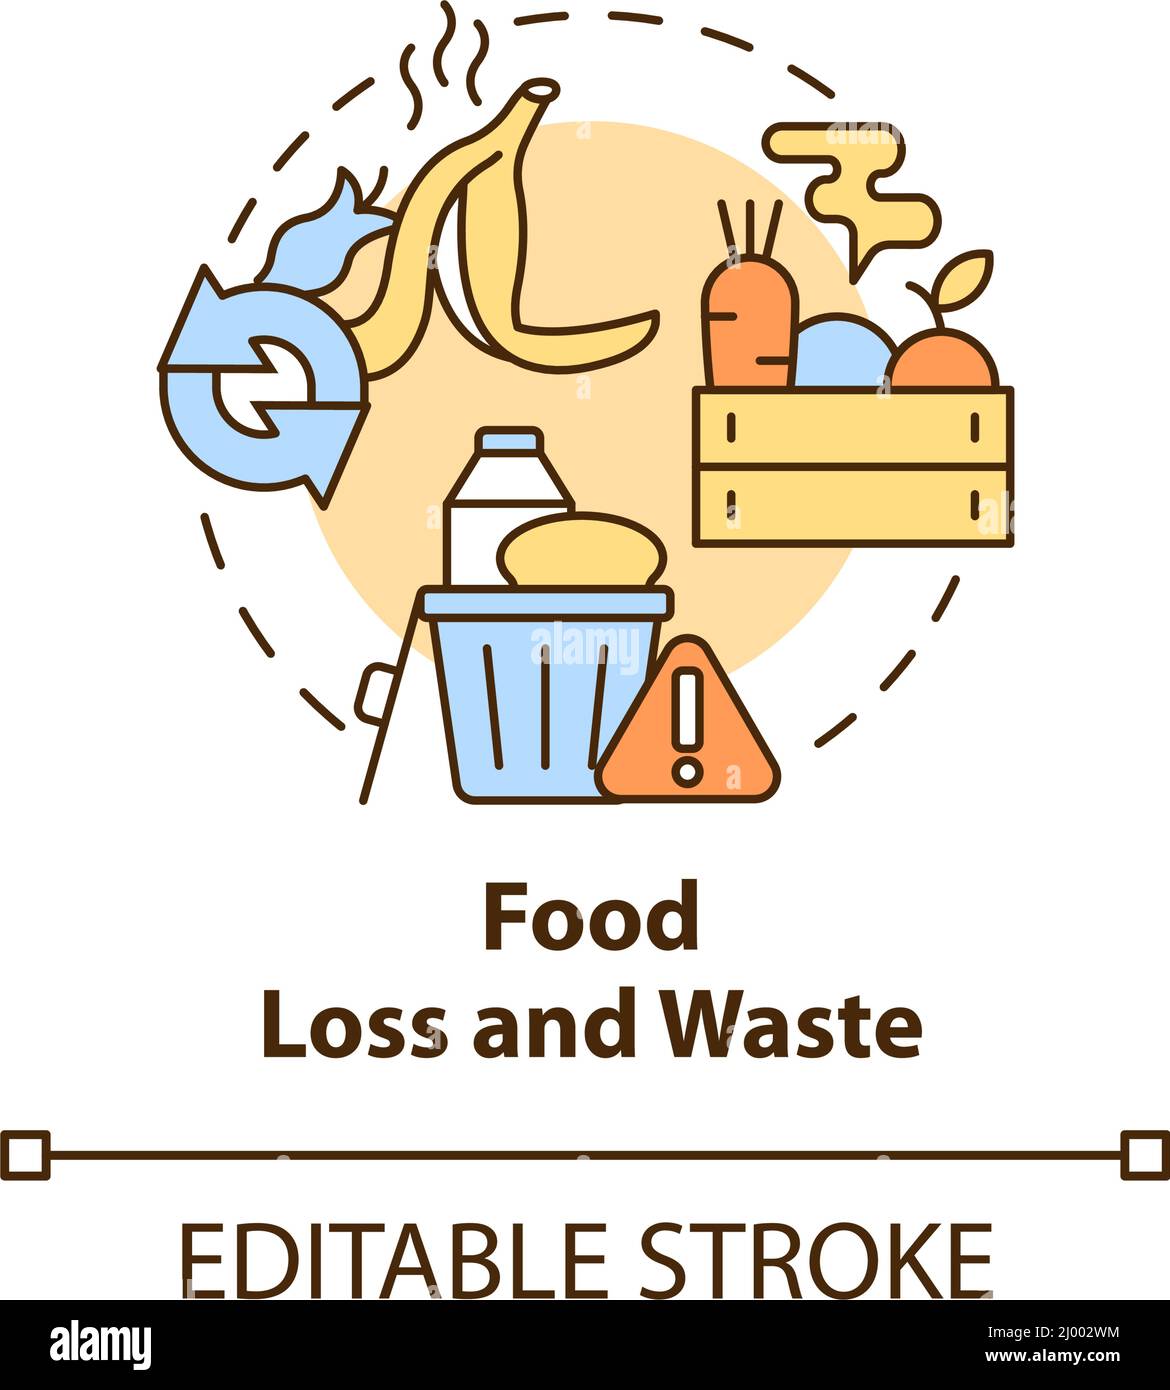 Image about food waste on Craiyon